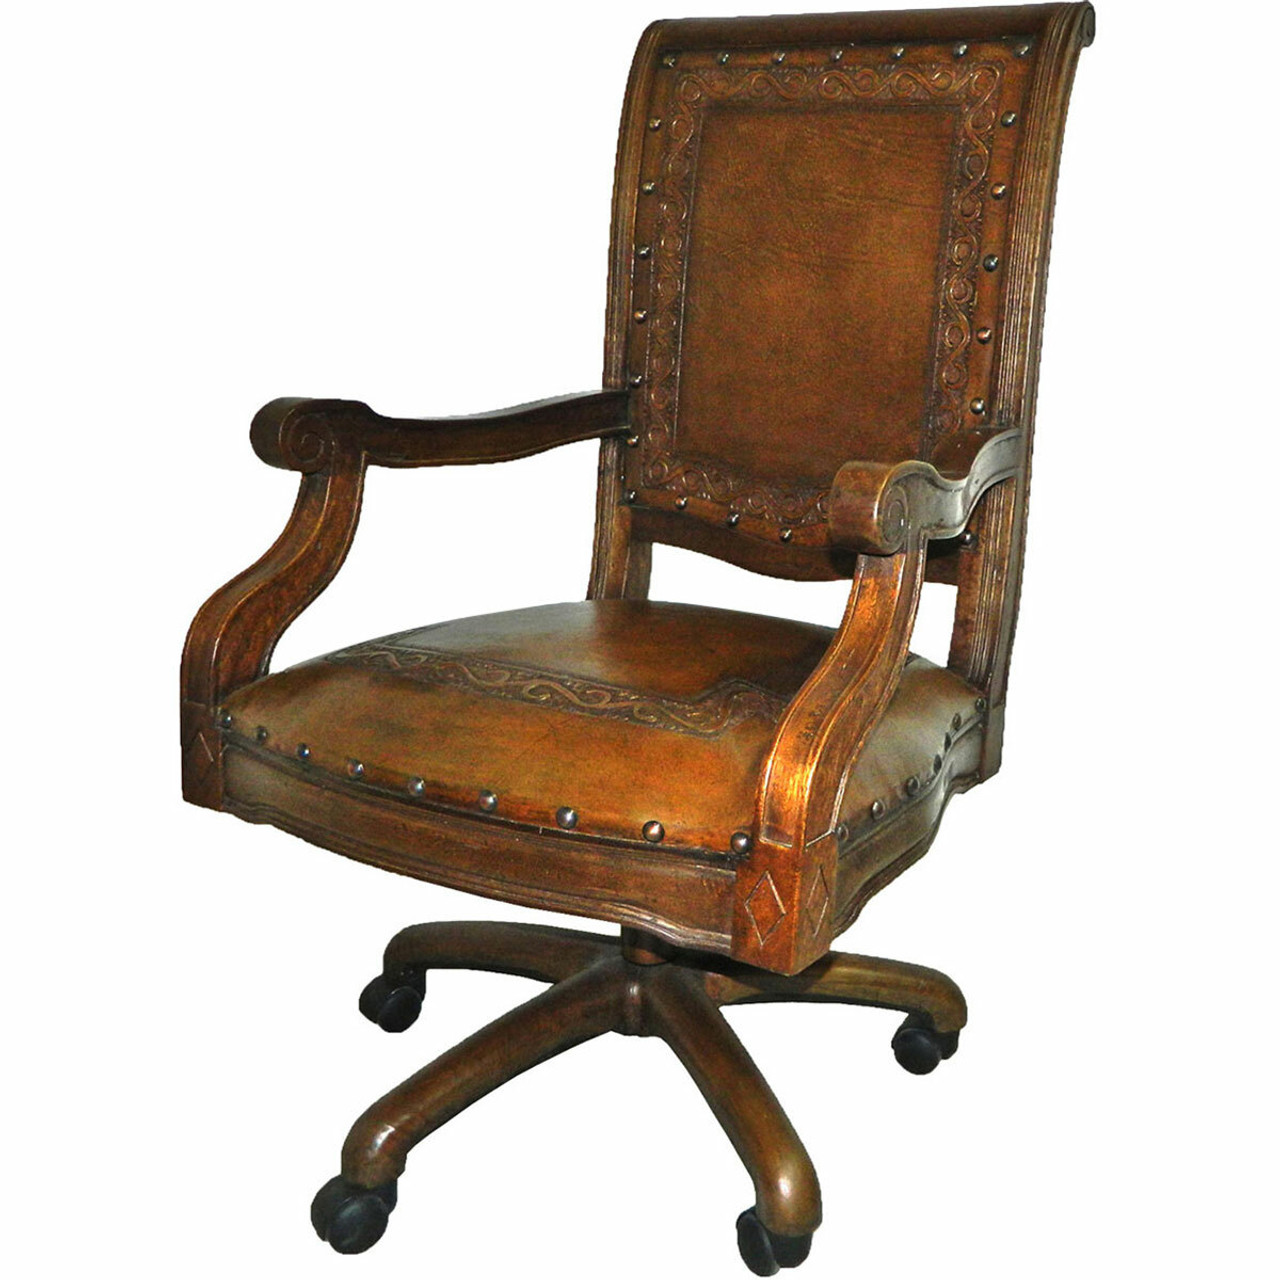 Imperial Office Chair - Classico & Rustic | Lone Star Western Decor